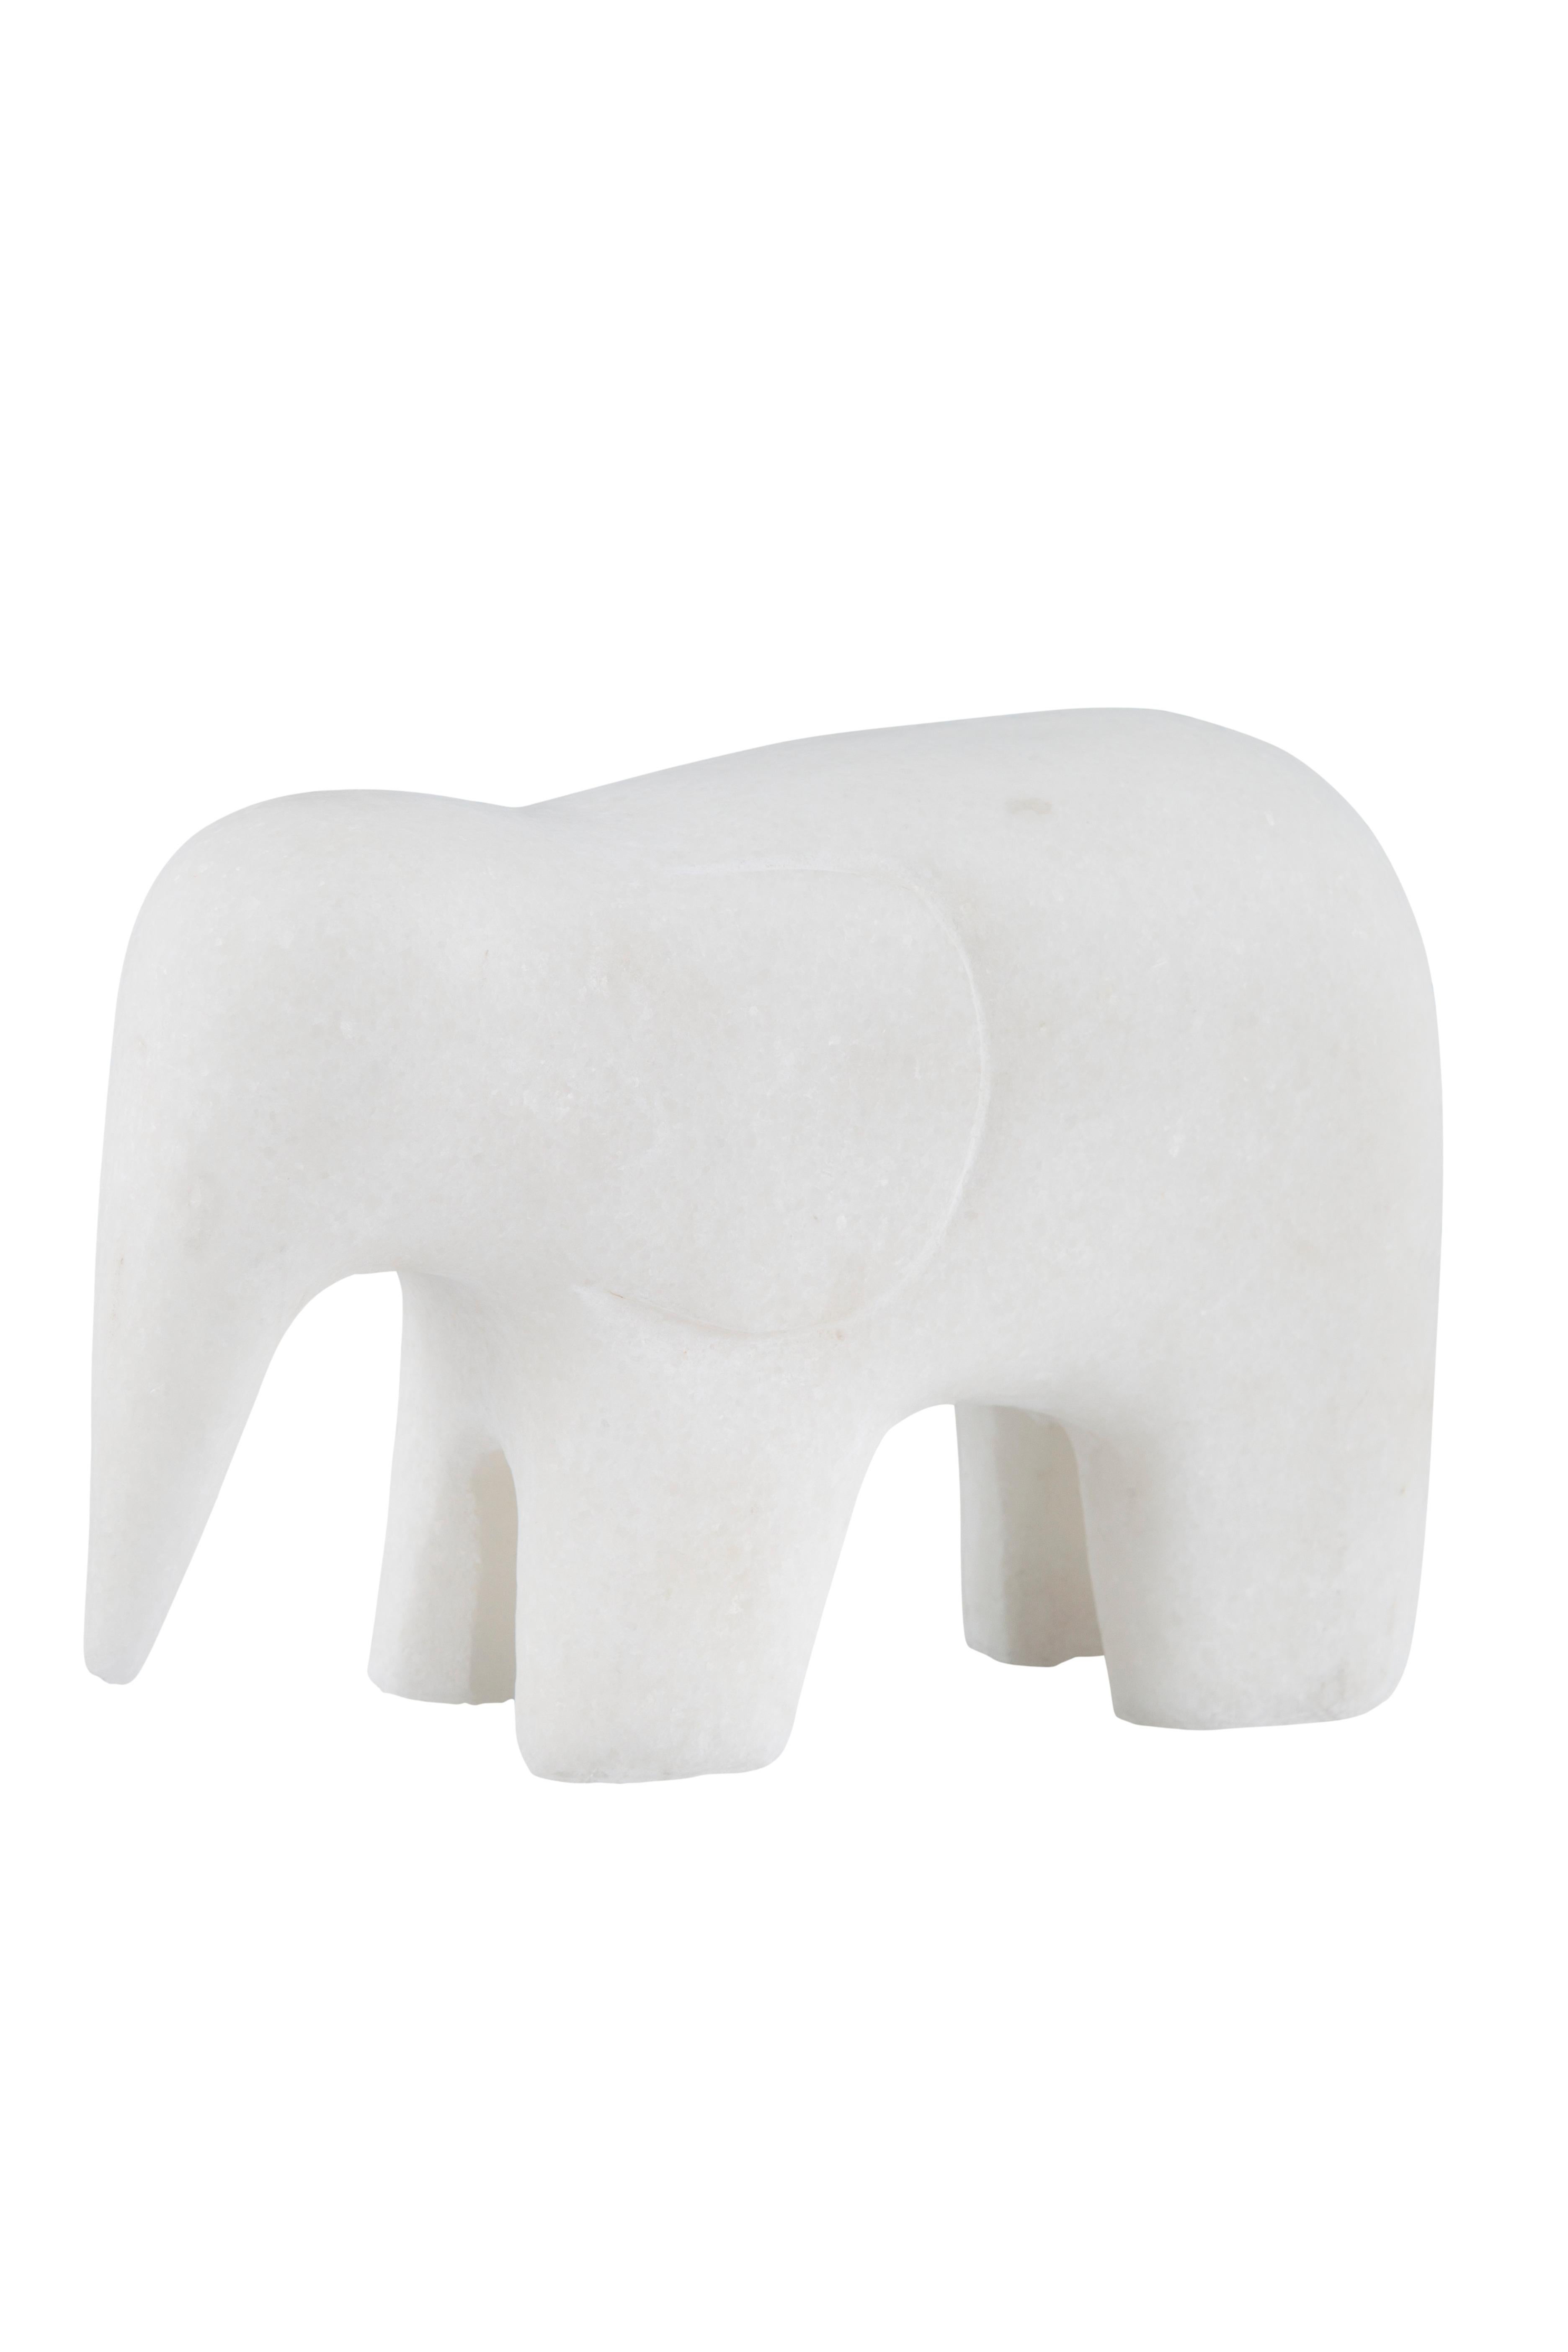 Contemporary Set/3 Animals, Calacatta Bianco Marble, Handmade by Lusitanus Home For Sale